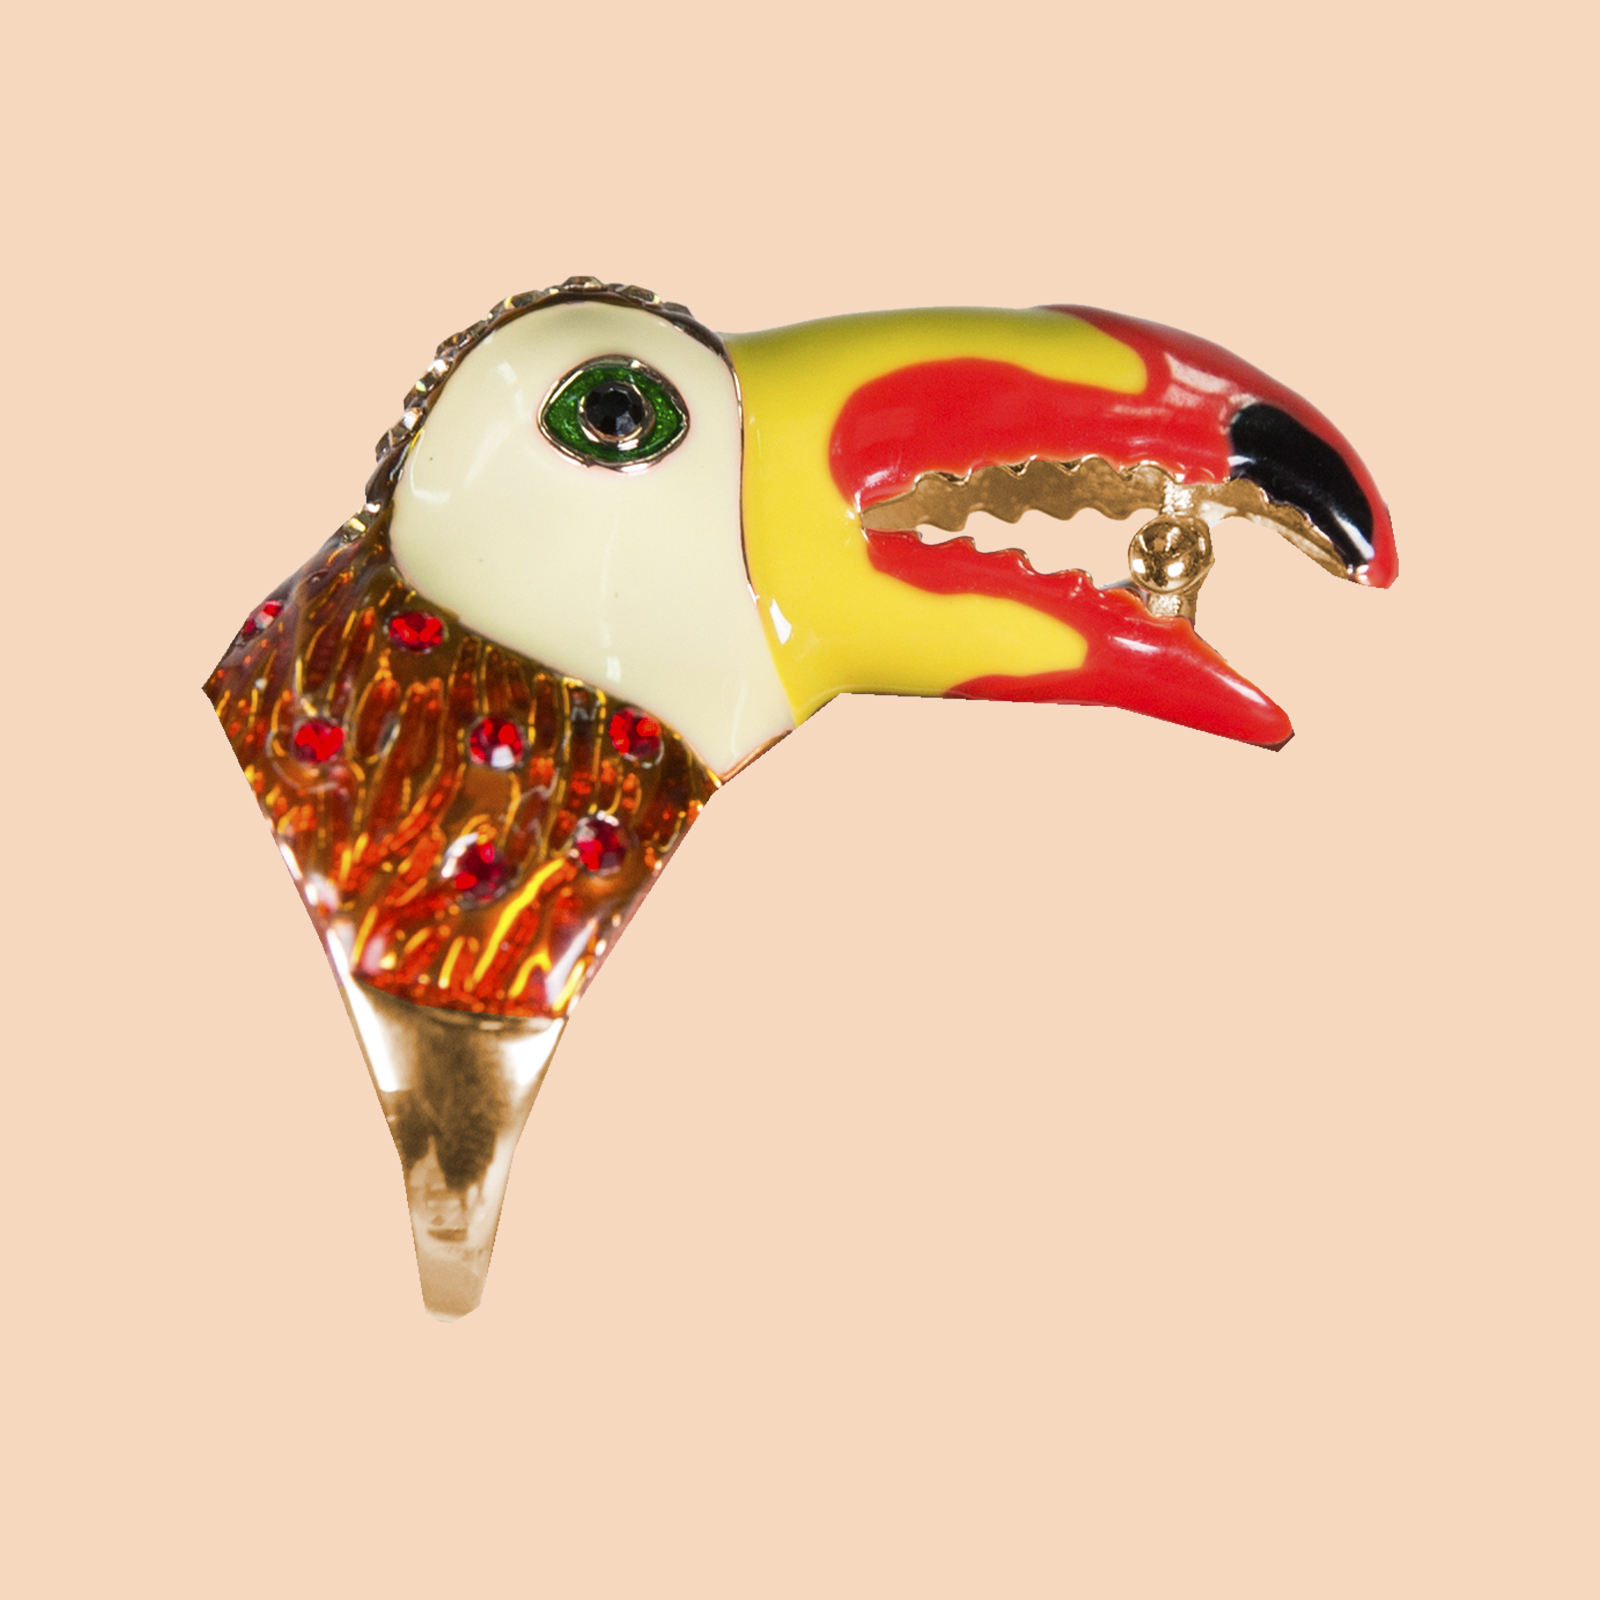 Red Amazon Toucan Ring